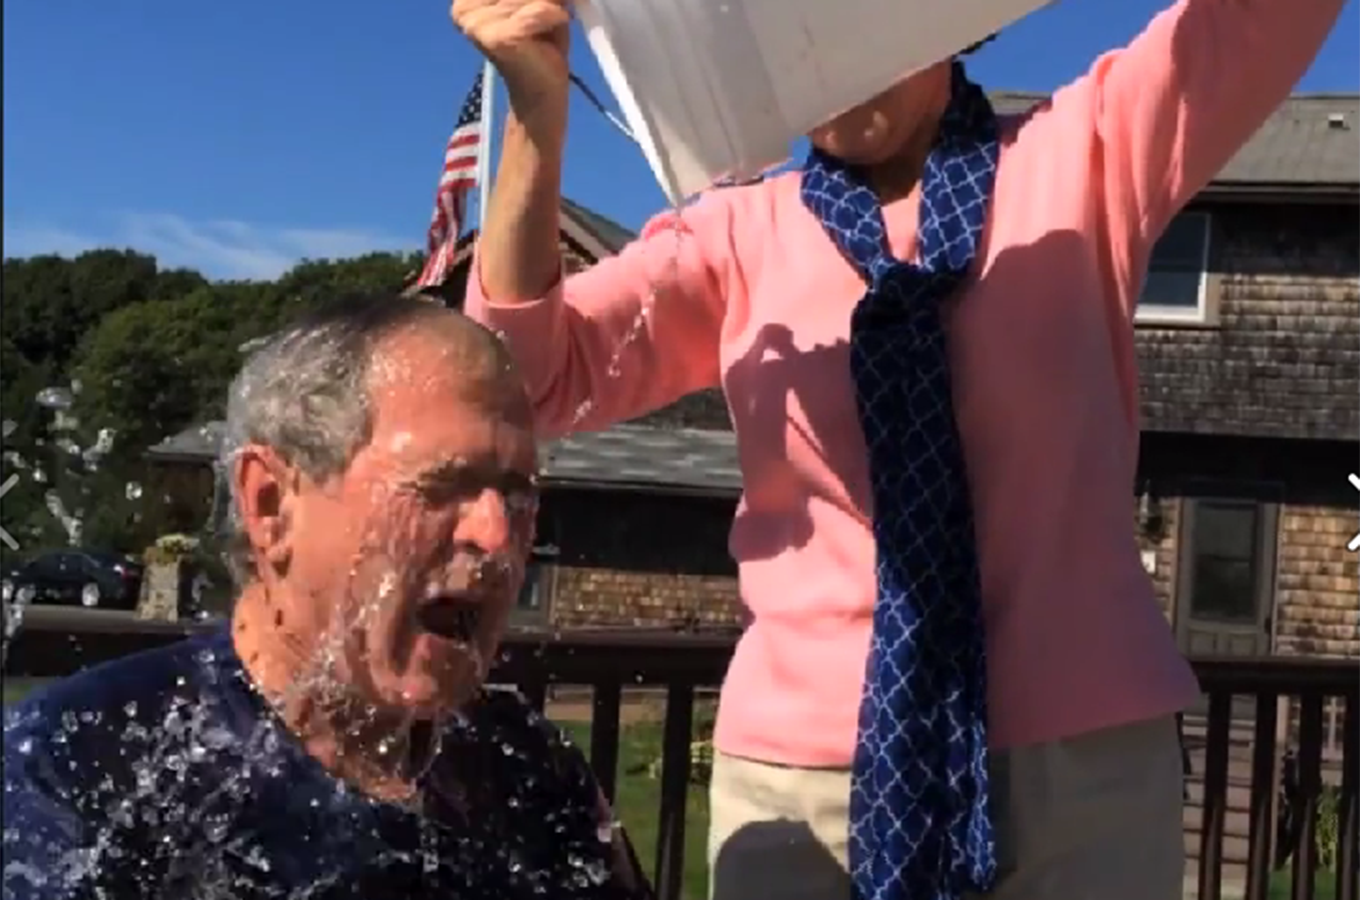 Do You Know Why You’re Accepting the ALS Ice Bucket Challenge?